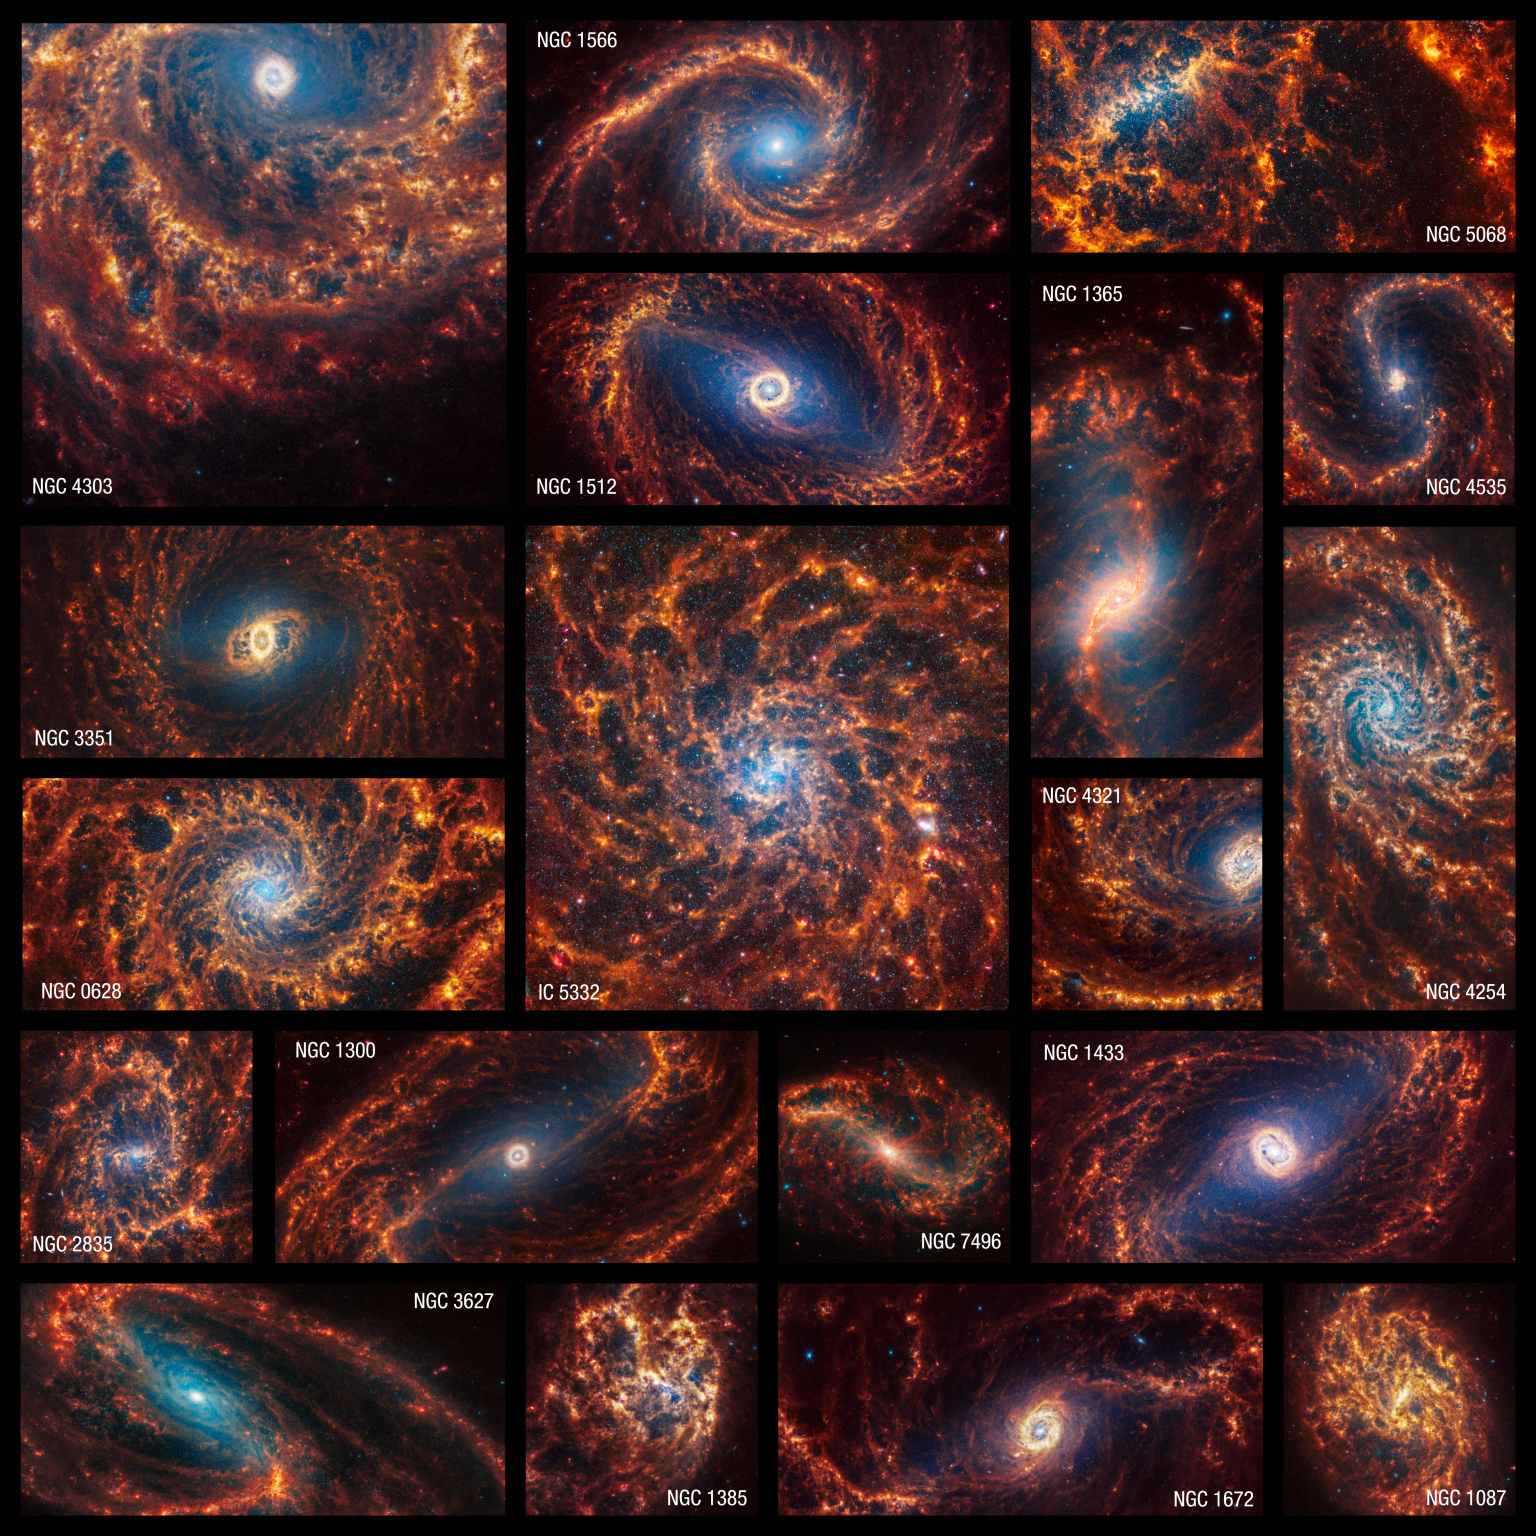 Nineteen Webb images of face-on spiral galaxies are combined in a mosaic. Some appear within squares, and others horizontal or vertical rectangles. Many galaxies have blue hazes toward the centers, and all have orange spiral arms. Many have clear bar shaped-structures at their centers, but a few have spirals that begin at their cores. Some of the galaxies' arms form clear spiral shapes, while others are more irregular. Some of the galaxies' arms appear to rotate clockwise and others counterclockwise. Most galaxy cores are centered, but a few appear toward an image's edge. Most galaxies appear to extend beyond the captured observations. The galaxies shown, listed in alphabetical order, are IC 5332, NGC 628, NGC 1087, NGC1300, NGC 1365, NGC 1385, NGC 1433, NGC 1512, NGC 1566, NGC 1672, NGC 2835, NGC 3351, NGC 3627, NGC 4254, NGC 4303, NGC 4321, NGC 4535, NGC 5068, and NGC 7496.